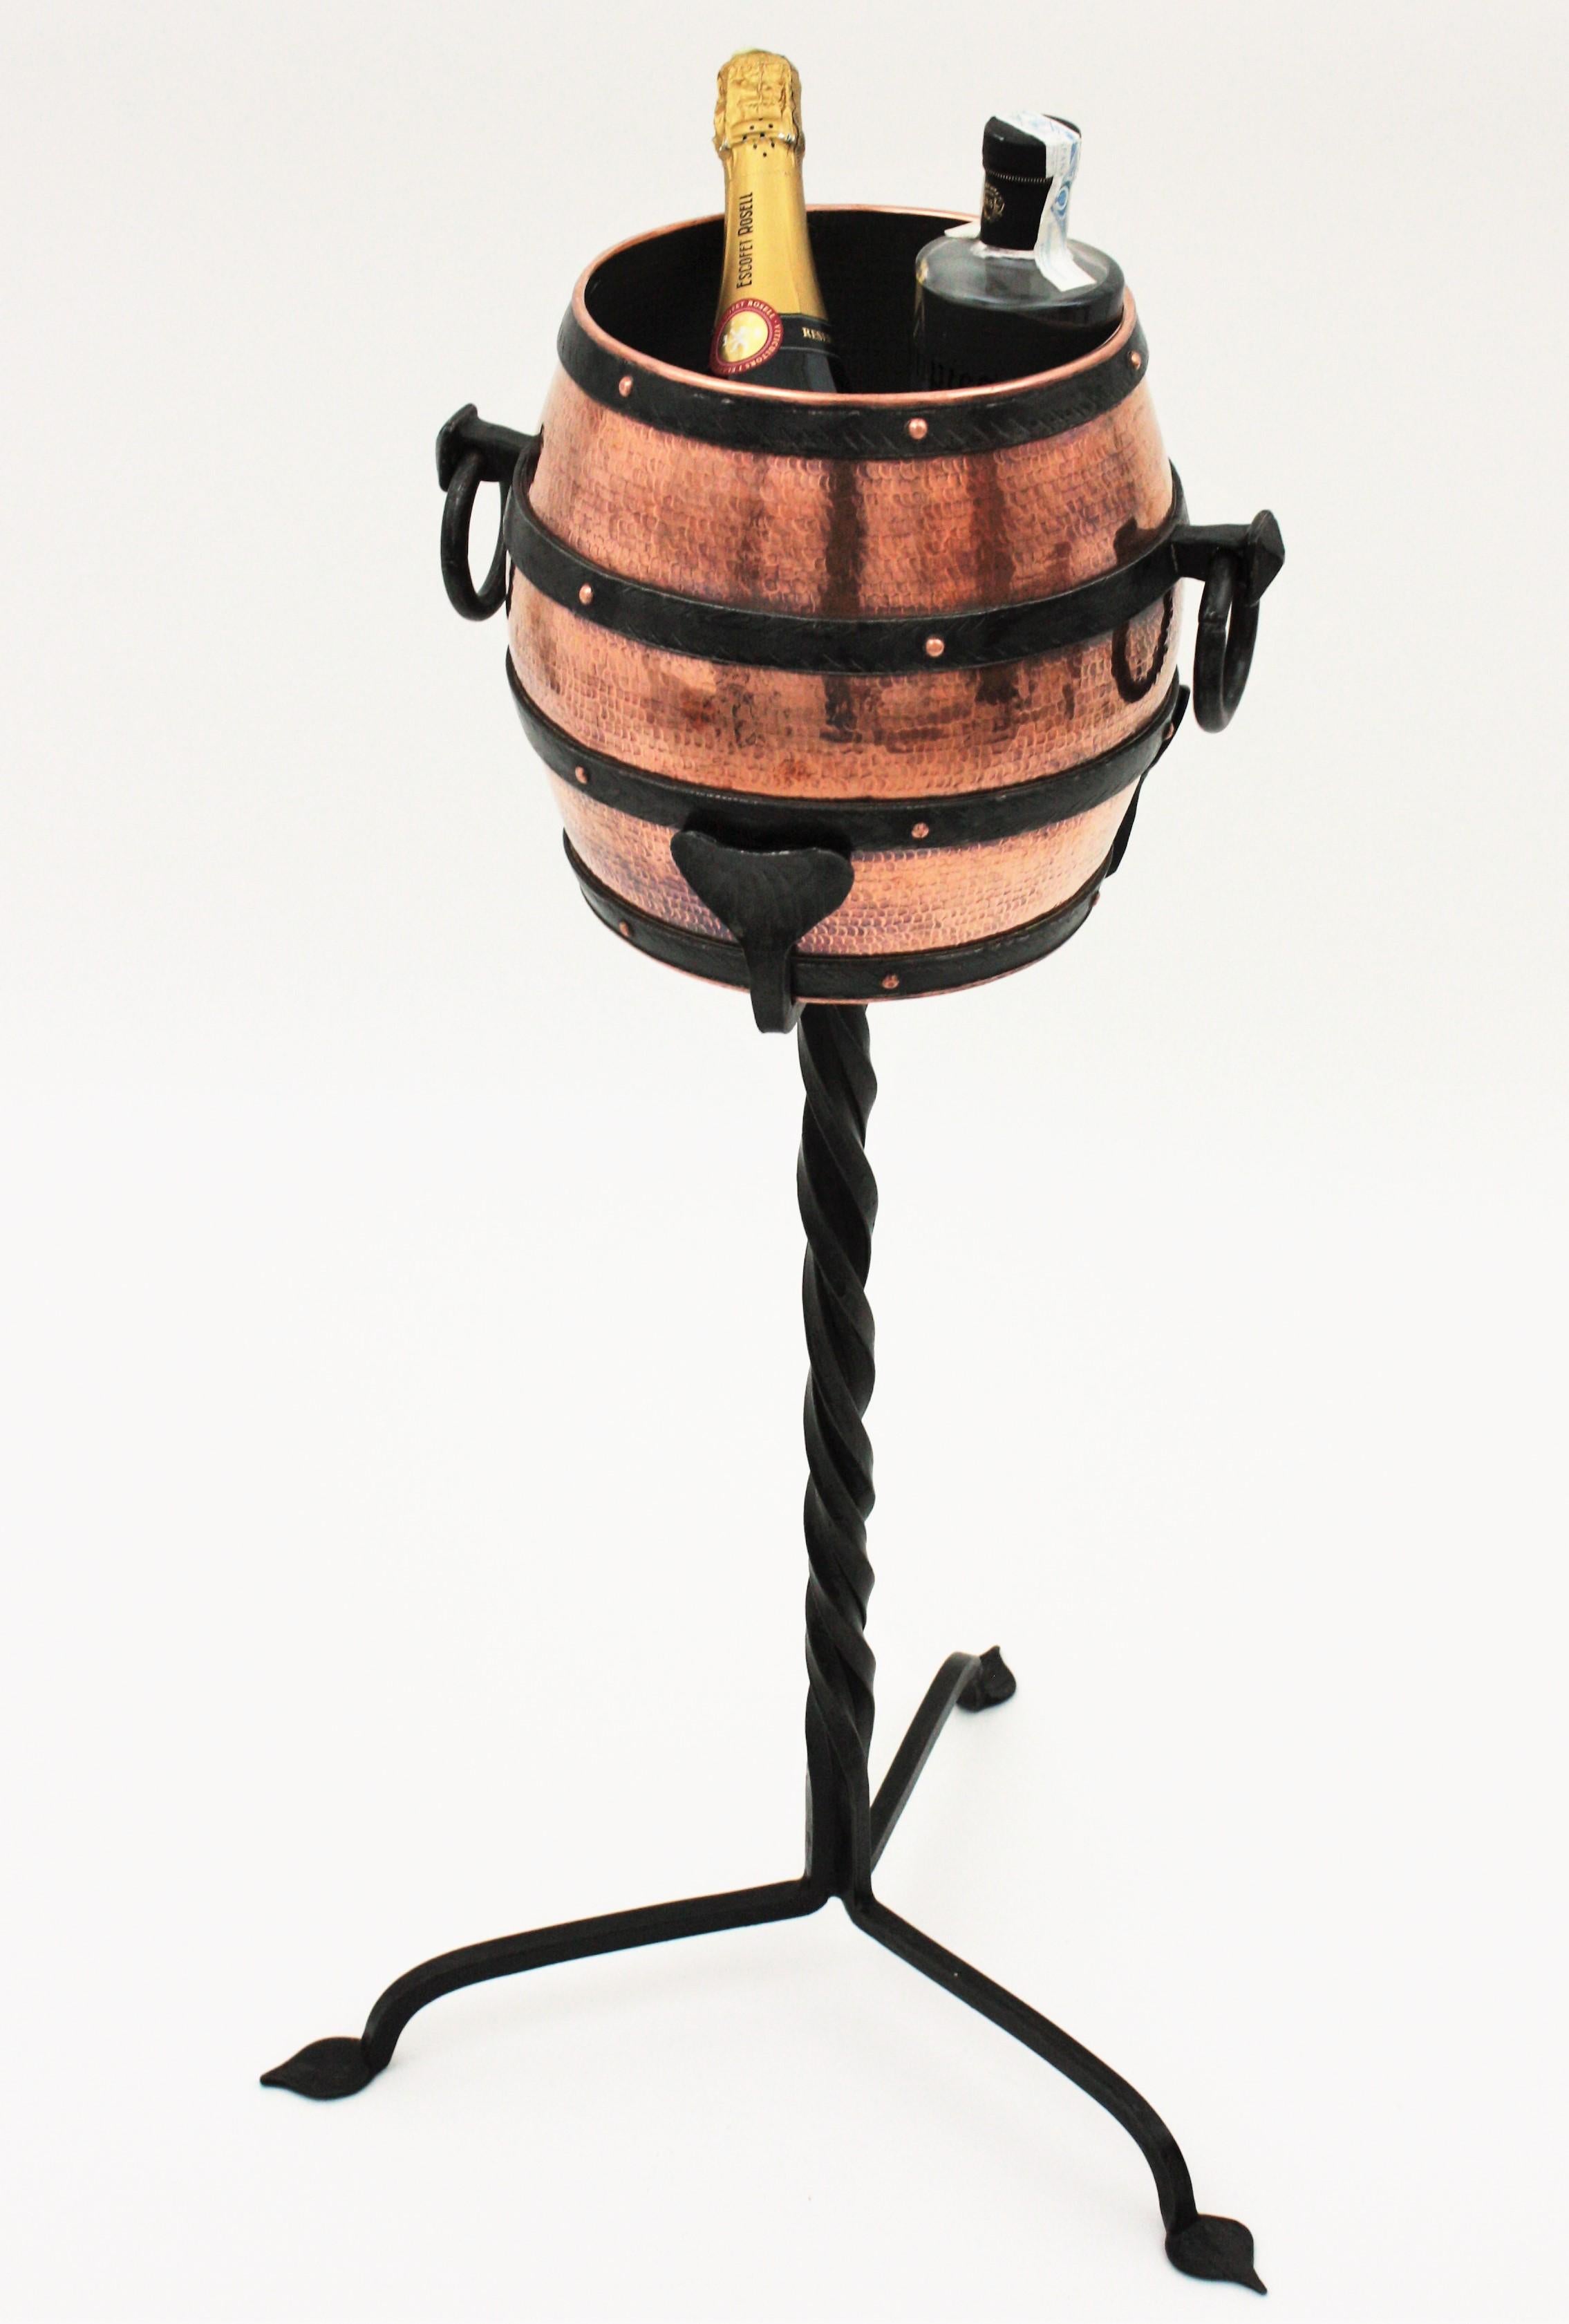 One of a kind hand forged copper and iron barrel shaped wine cooler stand, Spain, 1930s-1940s.
This tripod stand champagne serving set is all made by hand. The handwrought iron stand has a tripod base with twisting details and supports a large